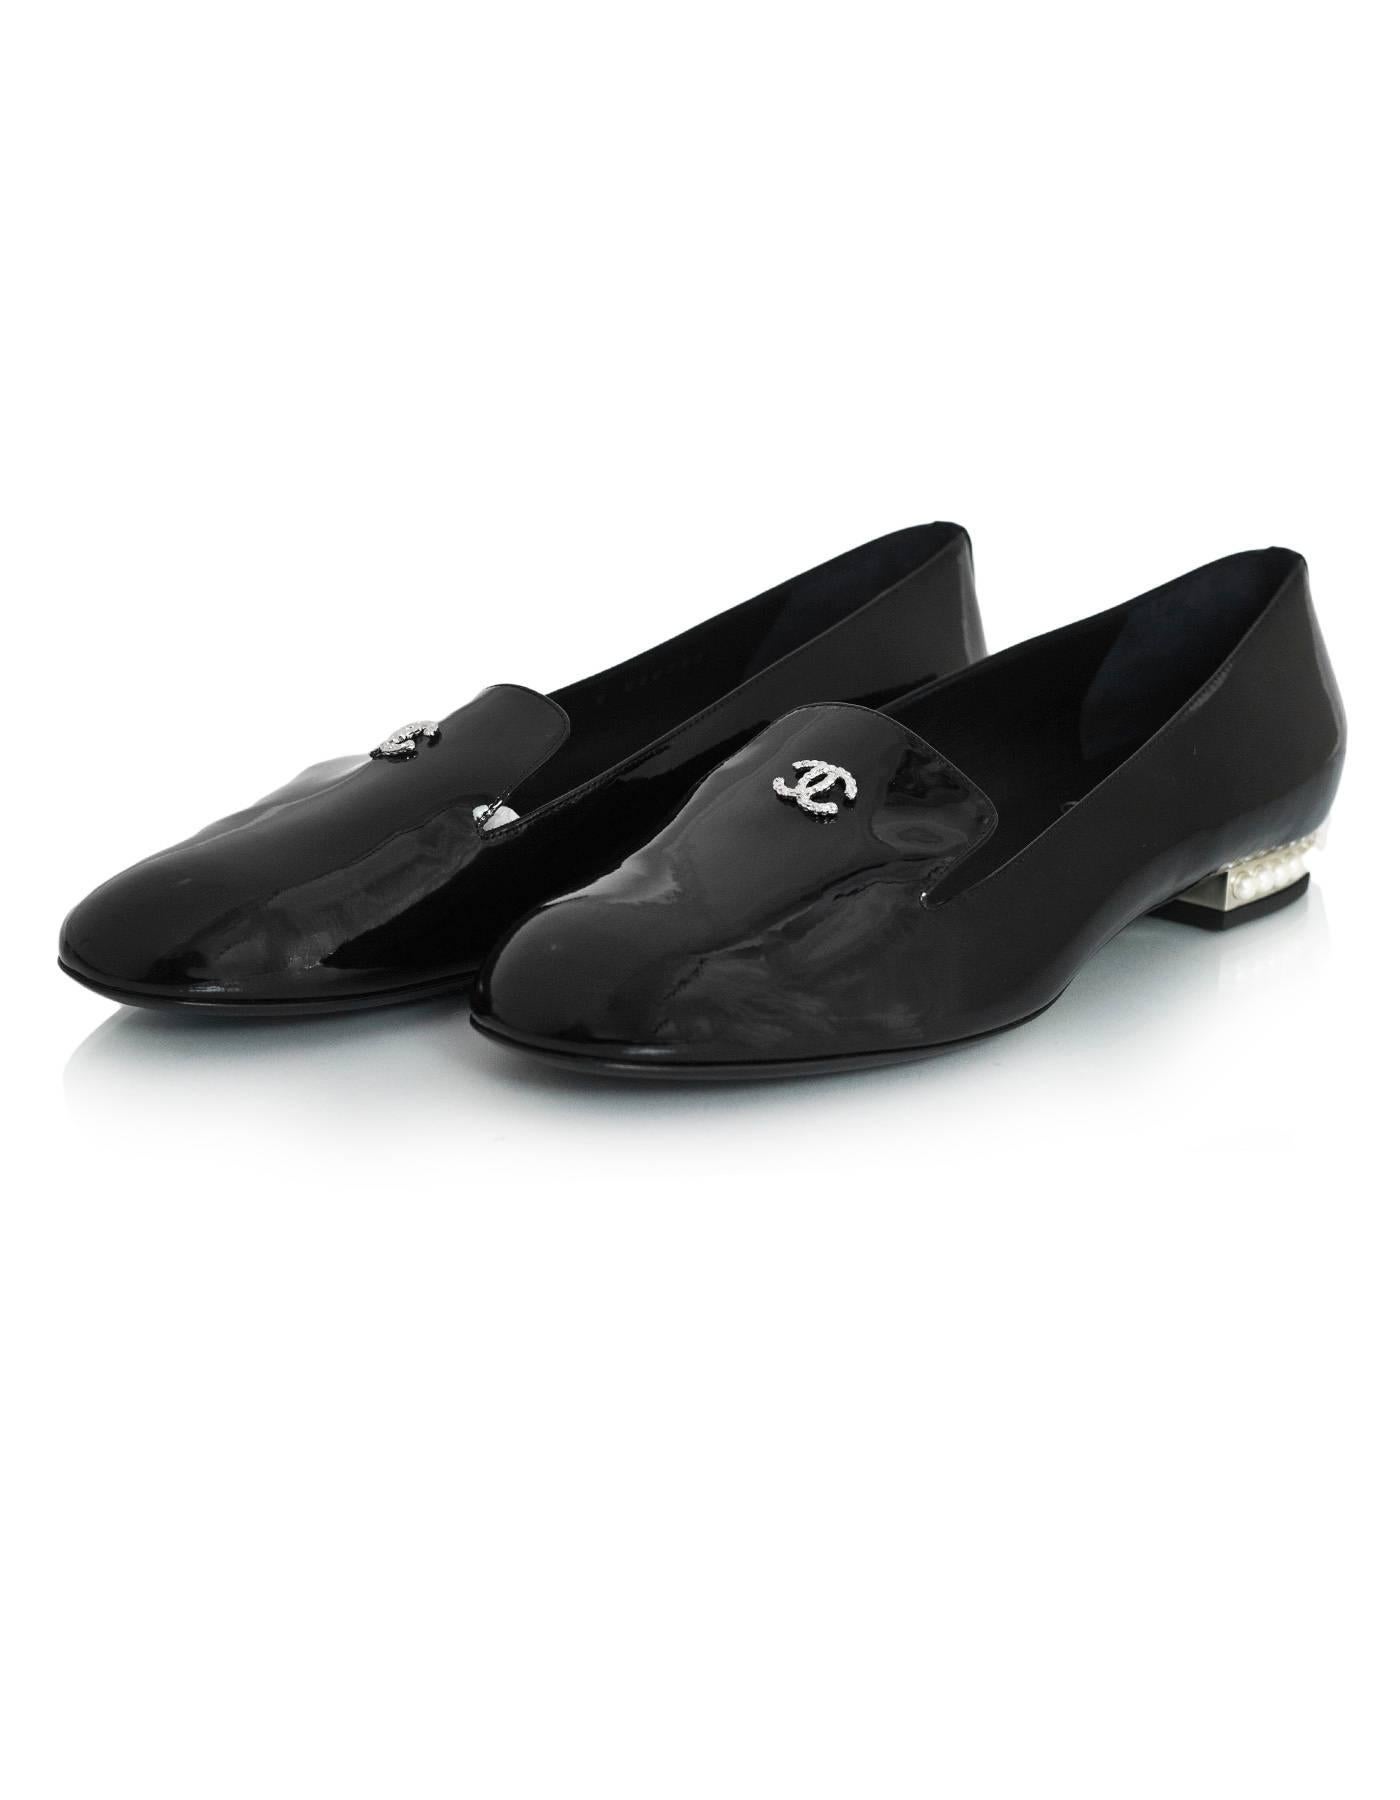 Chanel Black Patent CC Loafers Sz 39 NEW
Features pave crystal CC at tongue and pearl detail at heels

Made In: Italy
Color: Black
Materials: Patent leather
Closure/Opening: Slide on
Sole Stamp: CC Made in Italy 39
Retail Price: $1,075 + tax
Overall